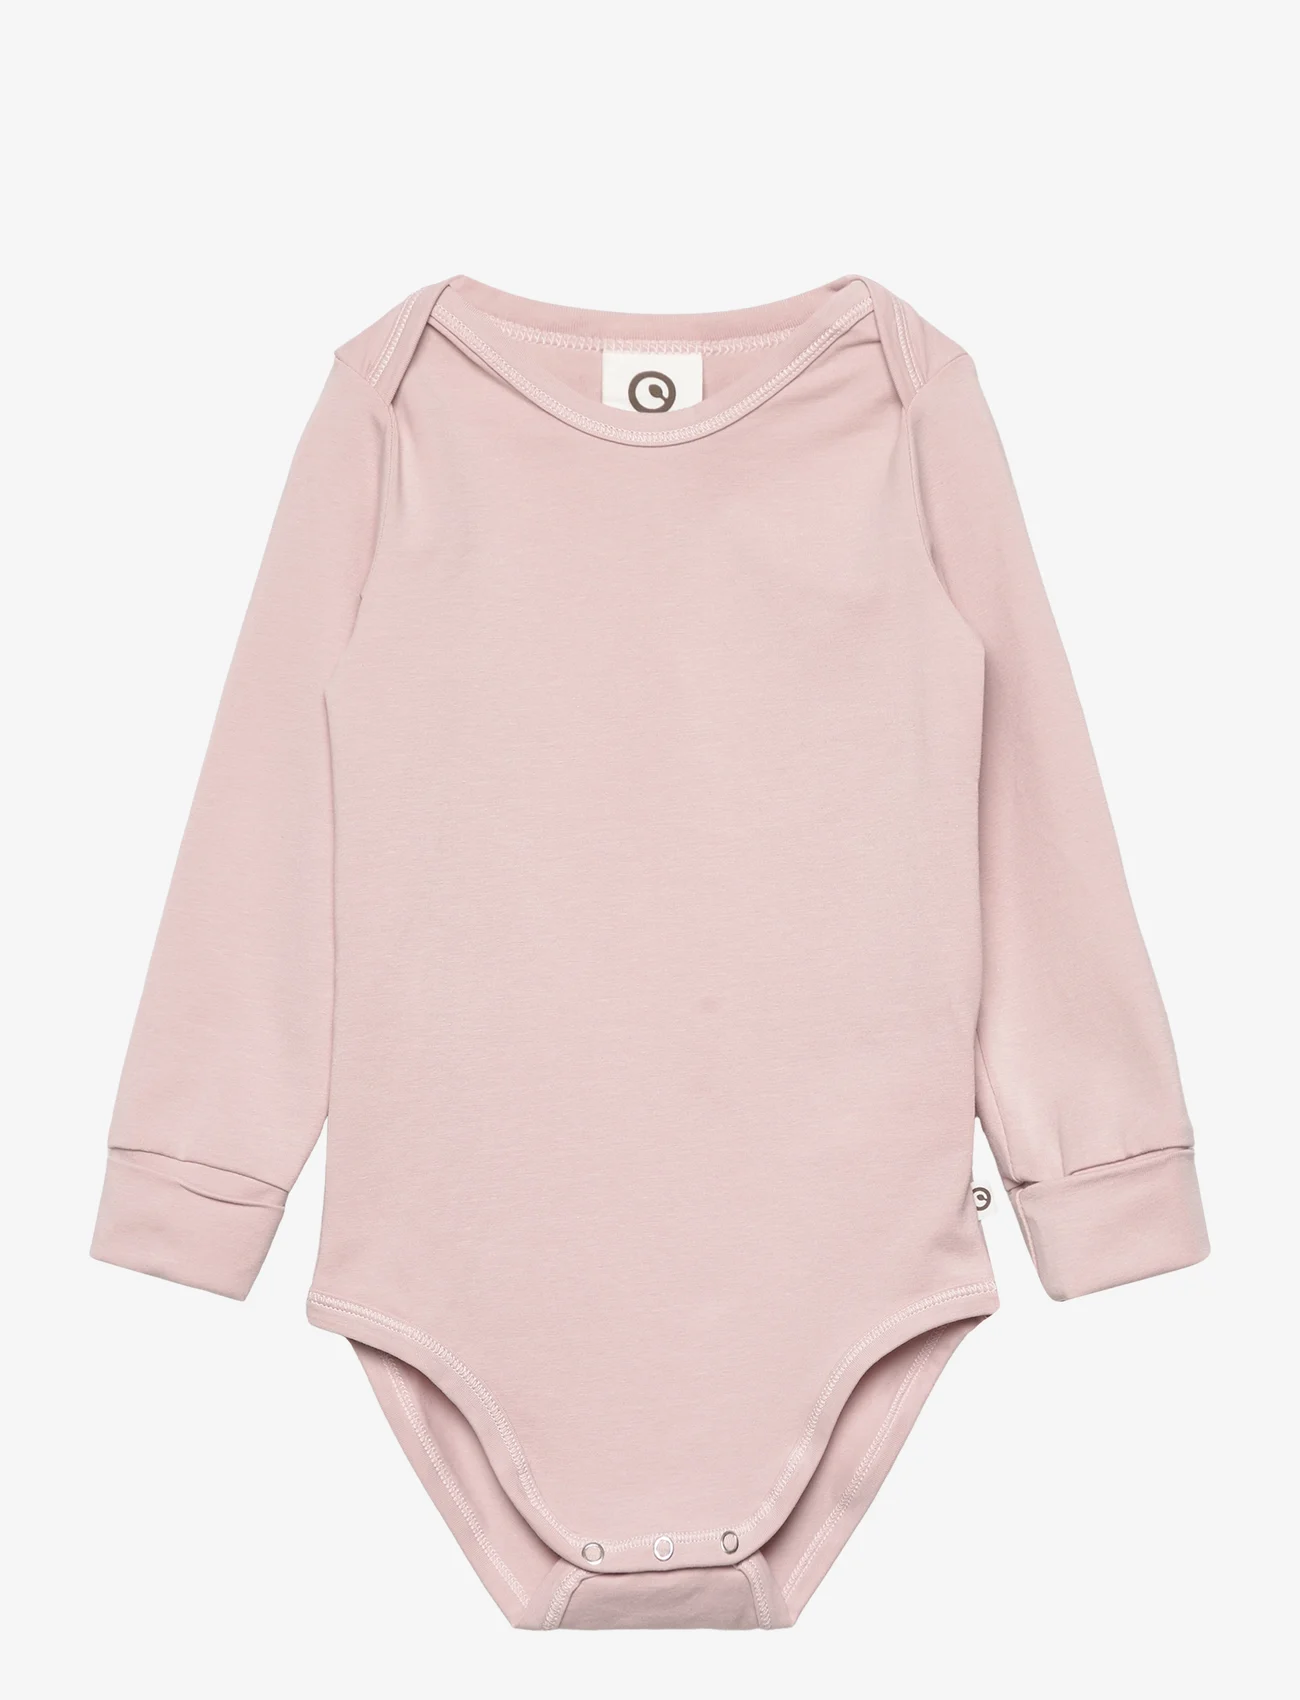 Müsli by Green Cotton - Cozy me l/s body - long-sleeved - rose moon - 0